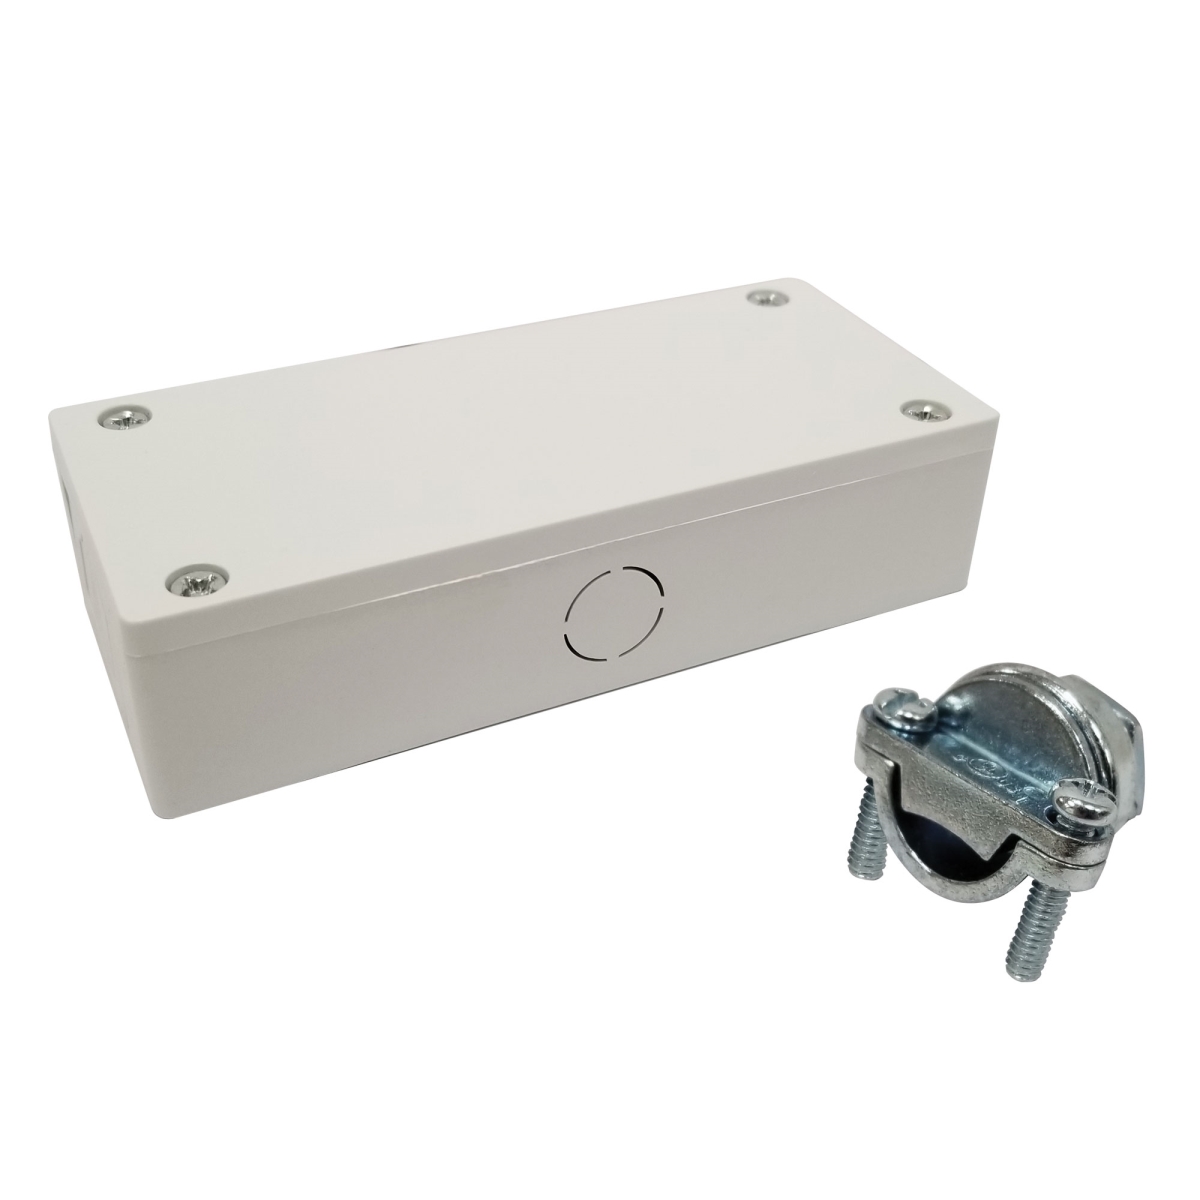 Picture of Nora Lighting NULSA-JBOX Junction Box for NULS LED Linear Undercabinet